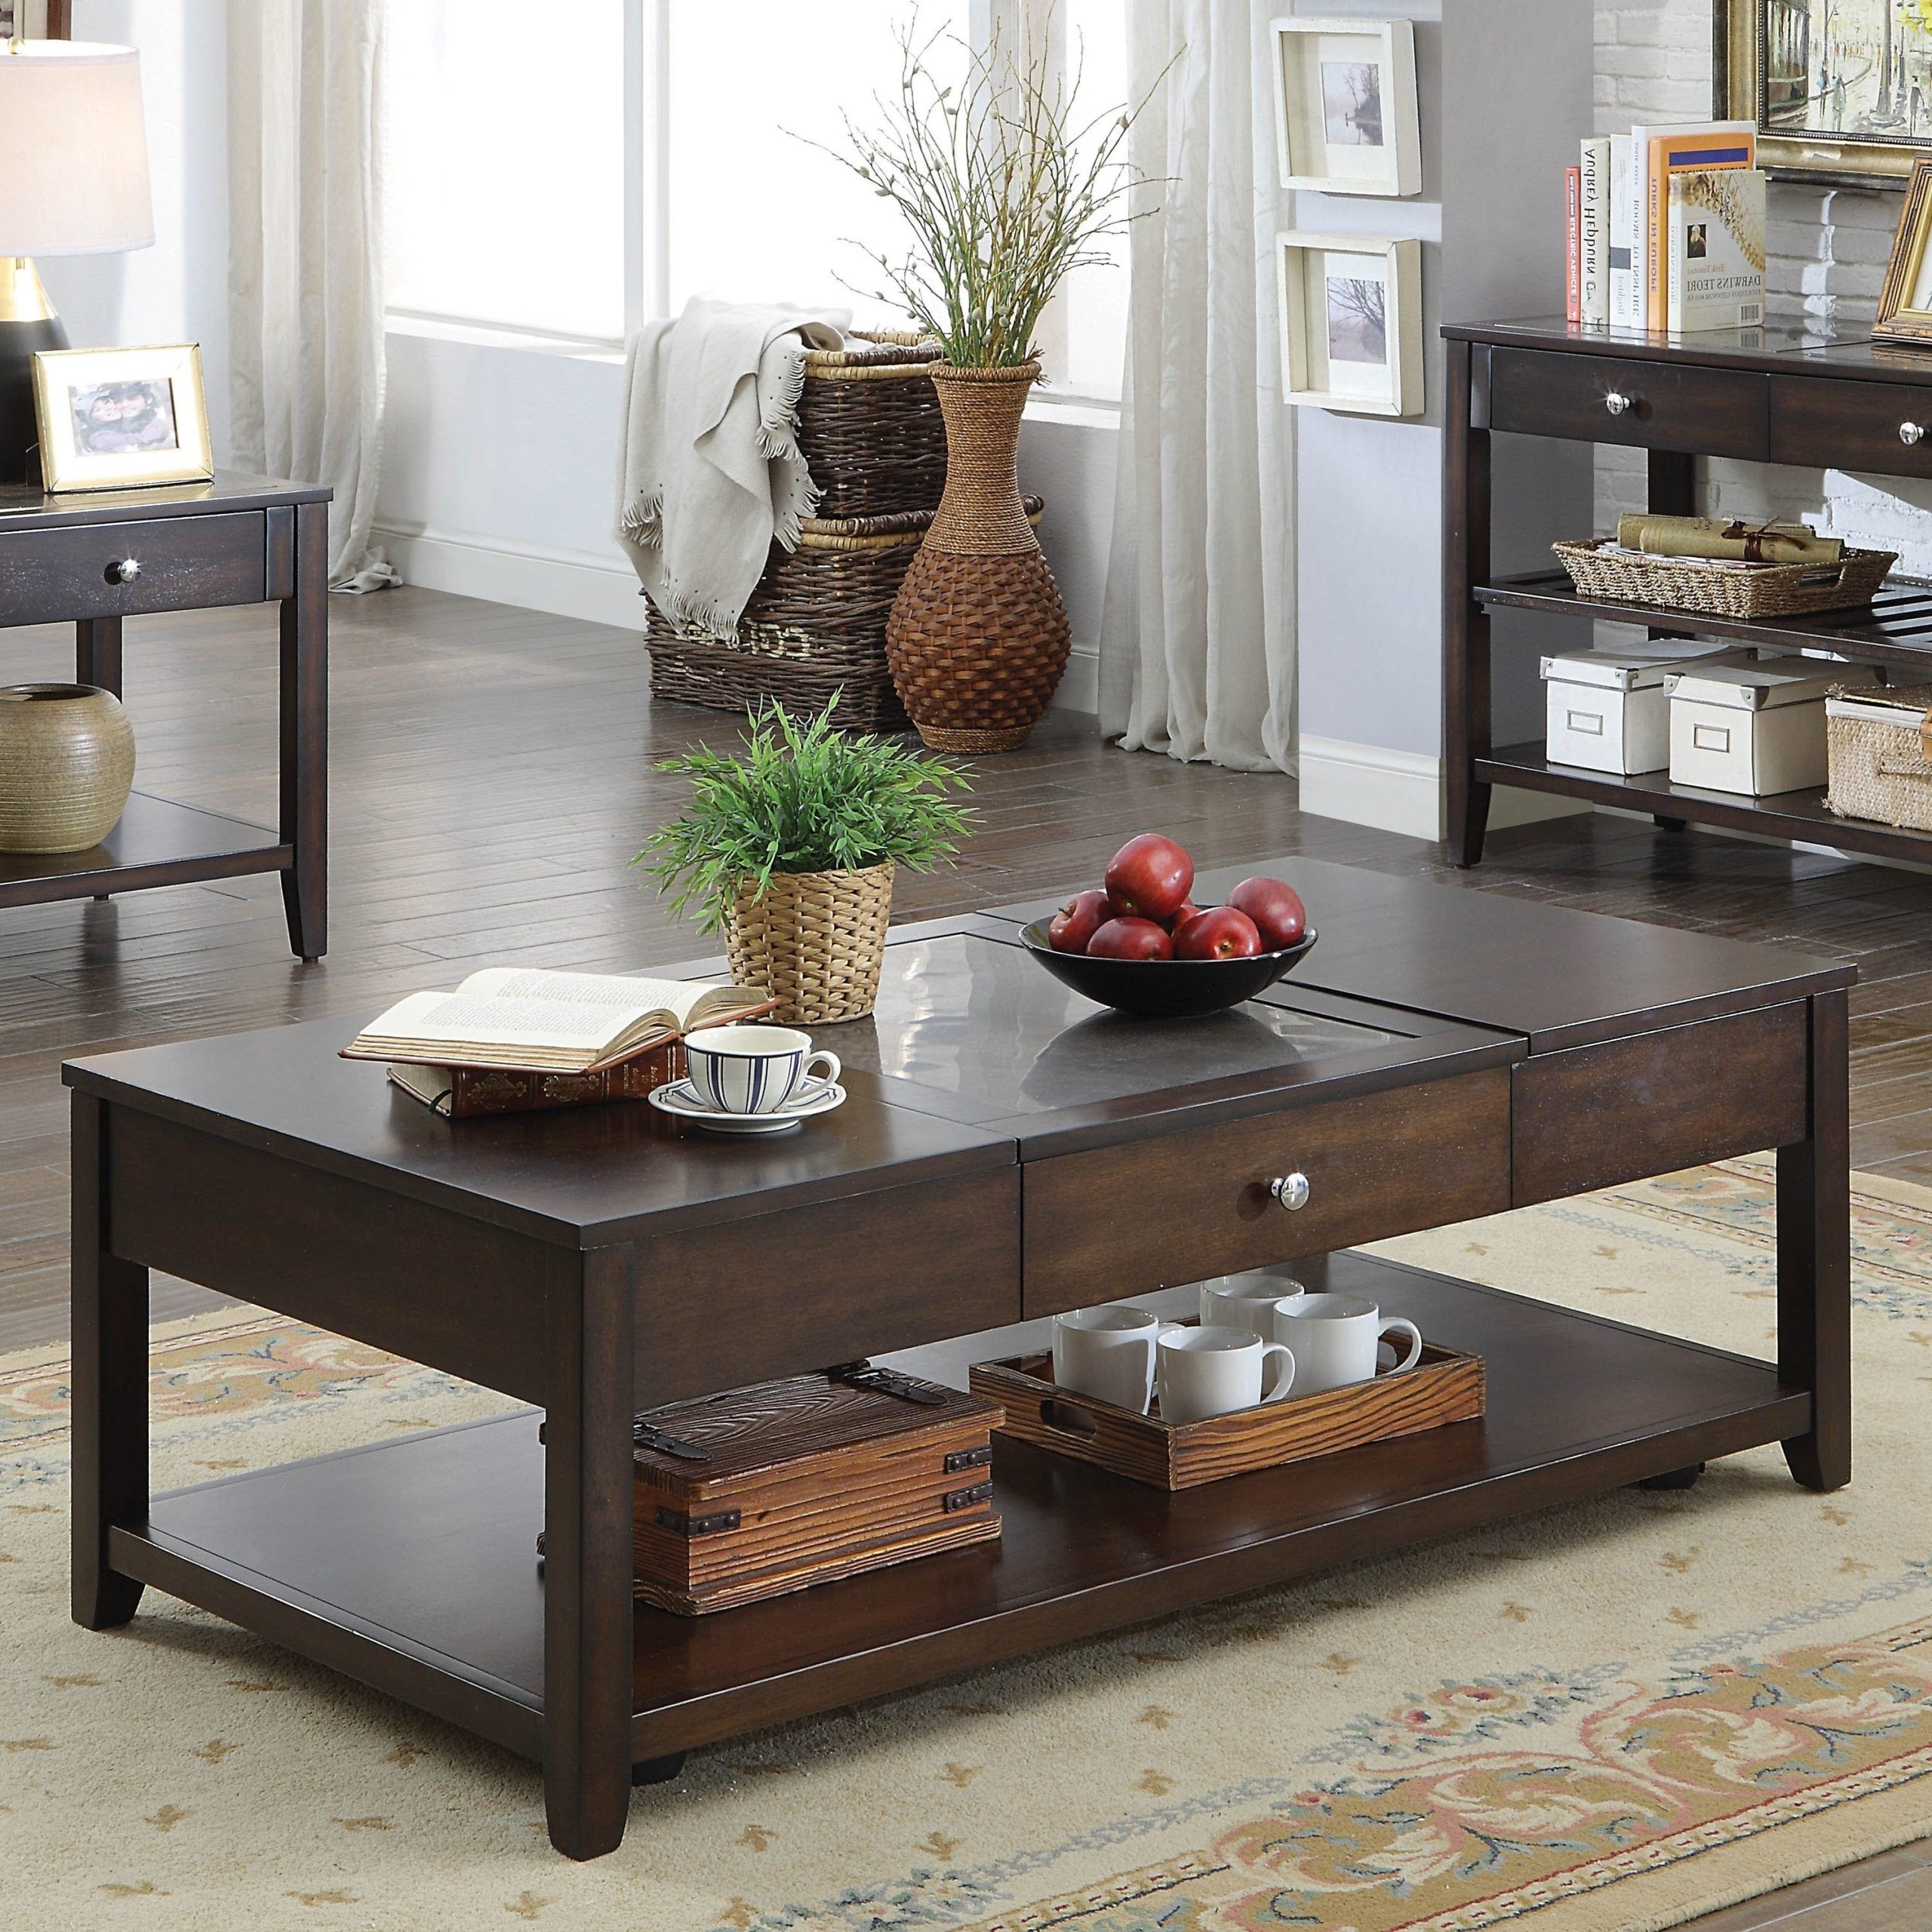 Espresso Coffee Table And End Tables – Includes 1 End Table Intended For Espresso Wood Finish Coffee Tables (View 2 of 20)